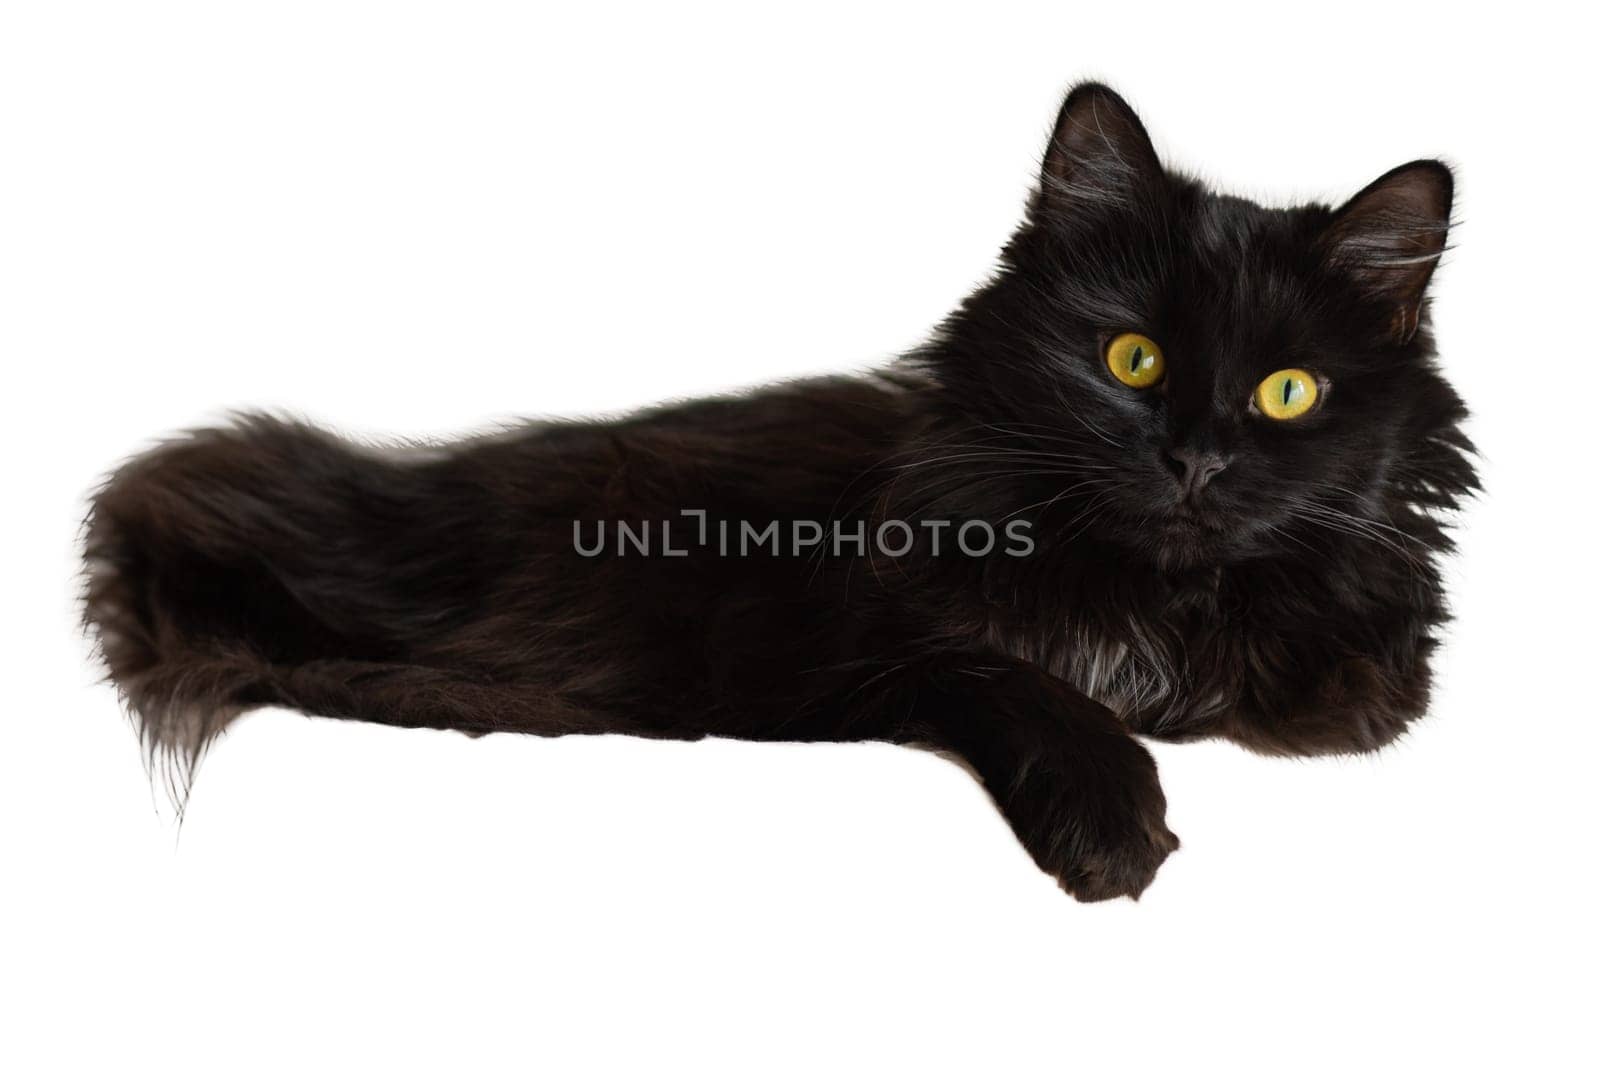 Black cat with yellow eyes. Pets. Close-up. White background.